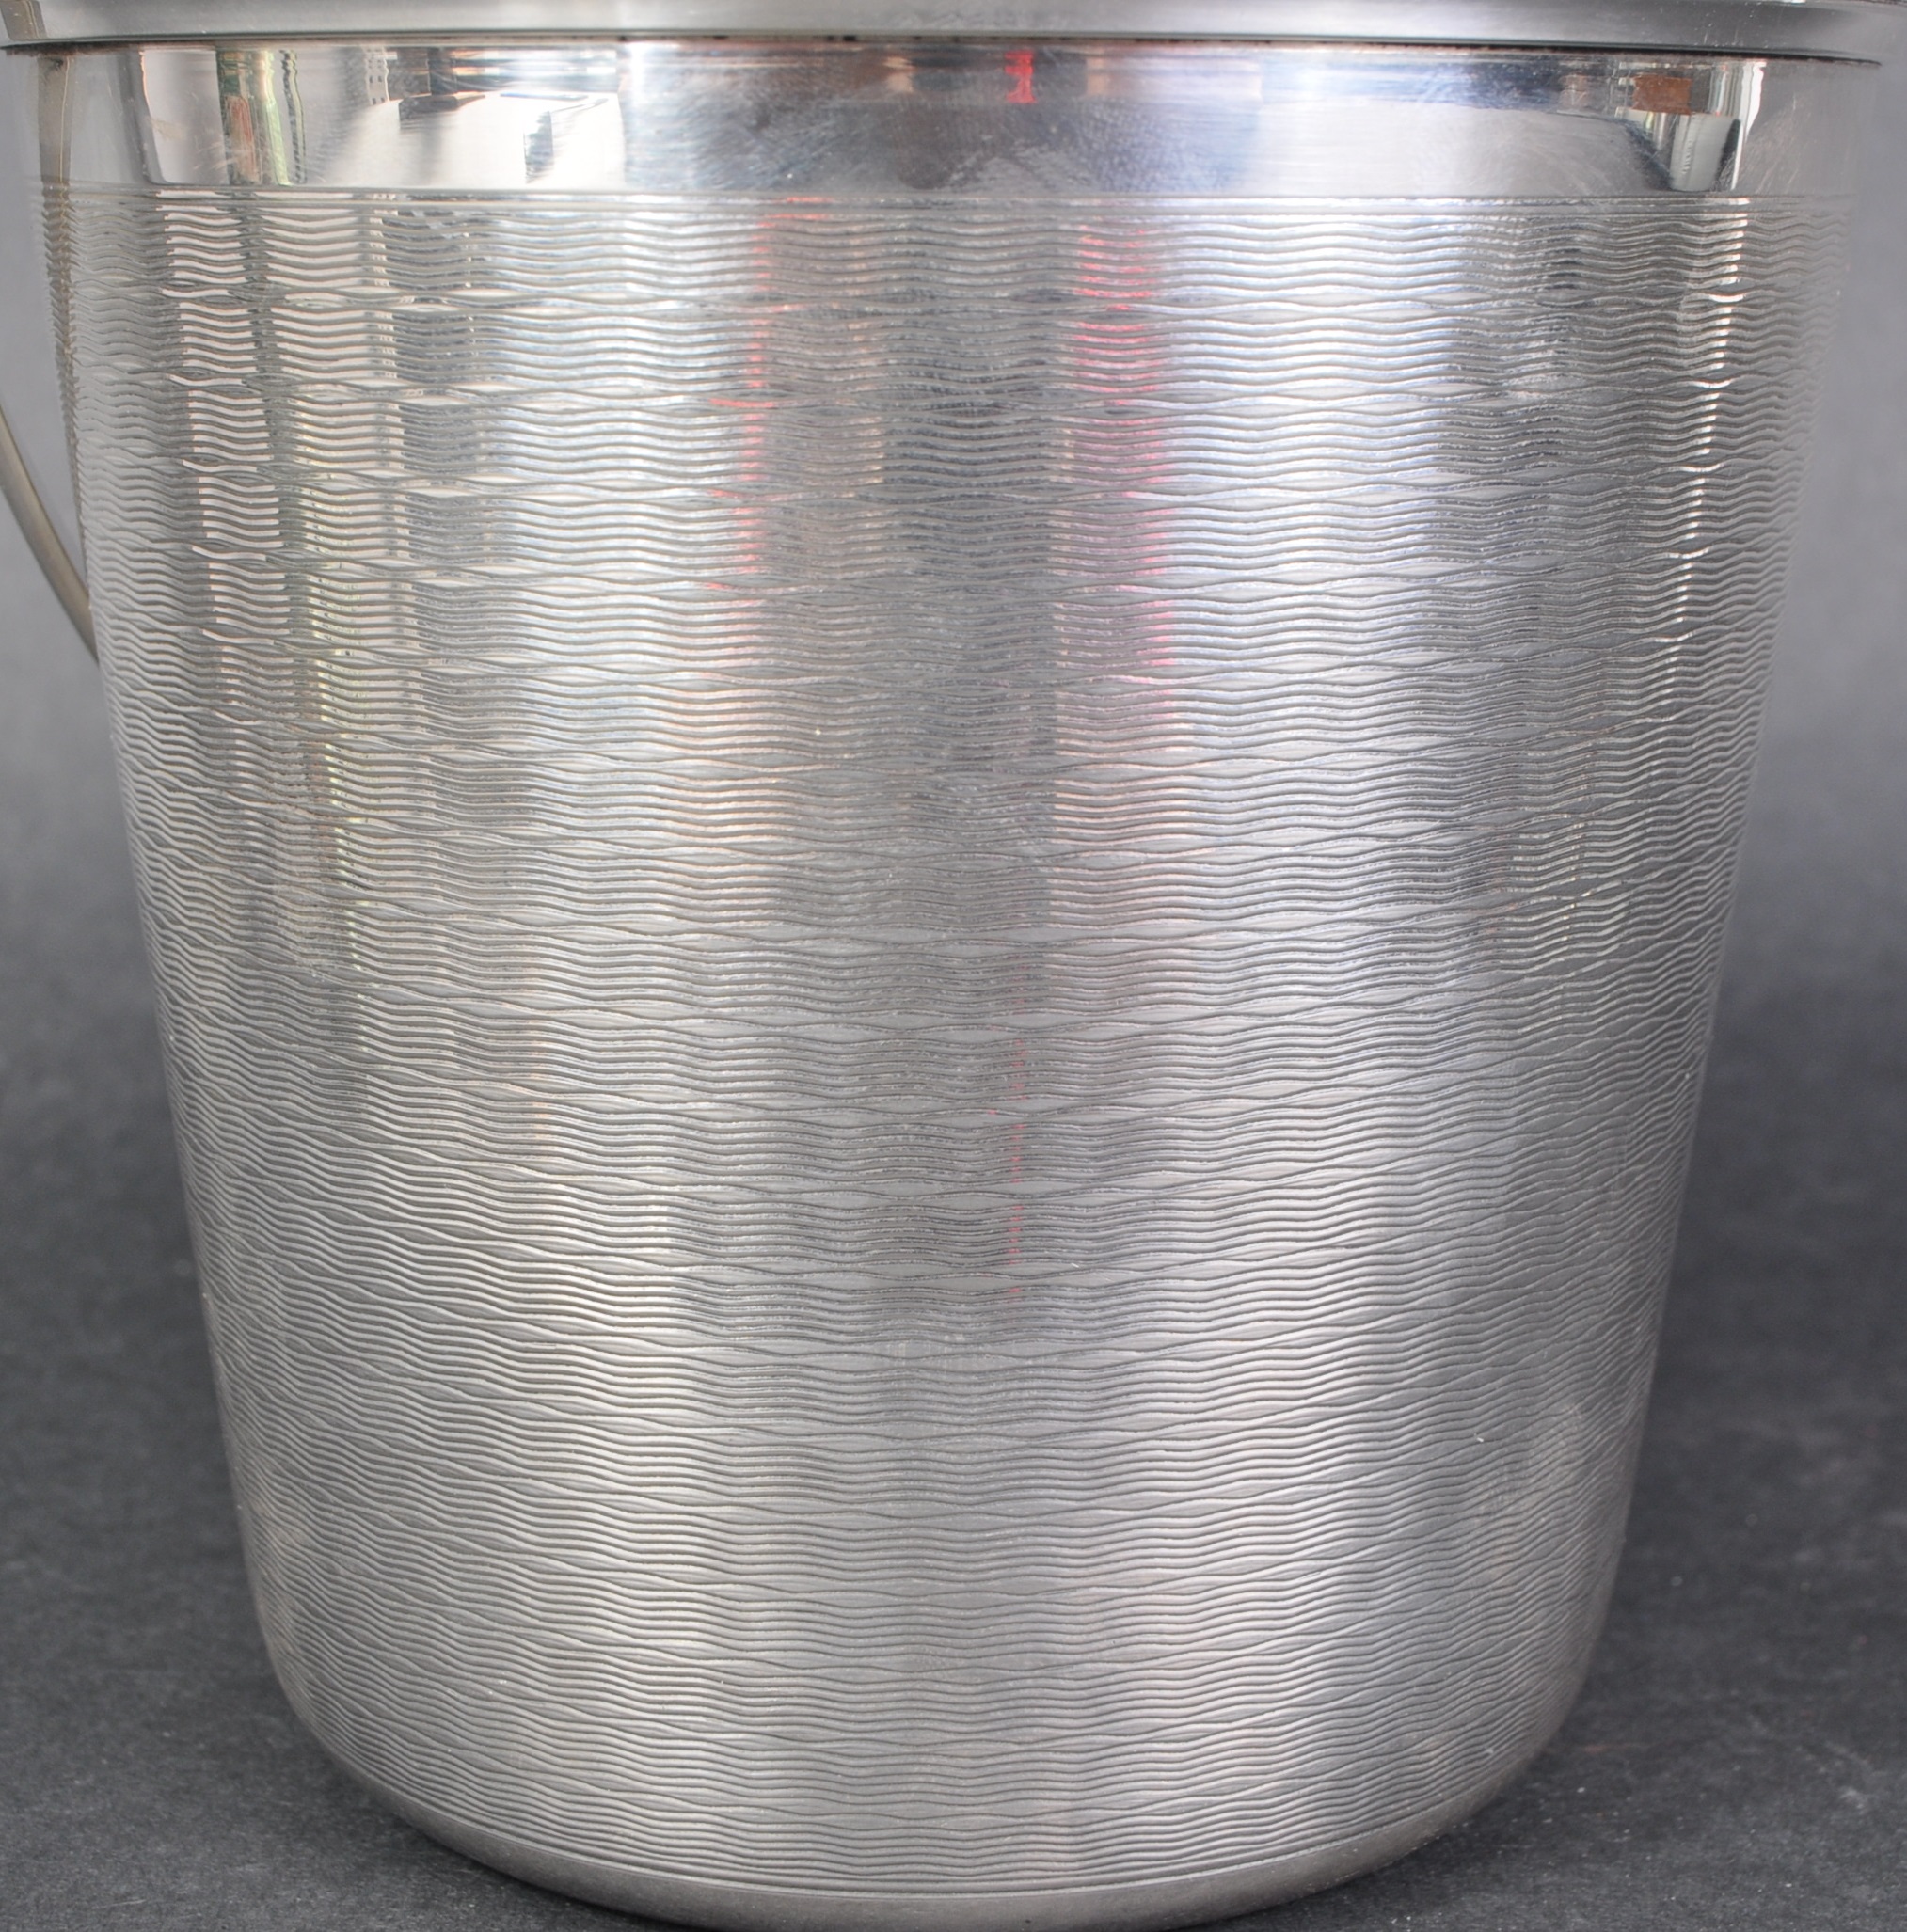 ART DECO SILVER-PLATED ICE BUCKET WITH ENGINE TURNED DETAILING - Image 4 of 6